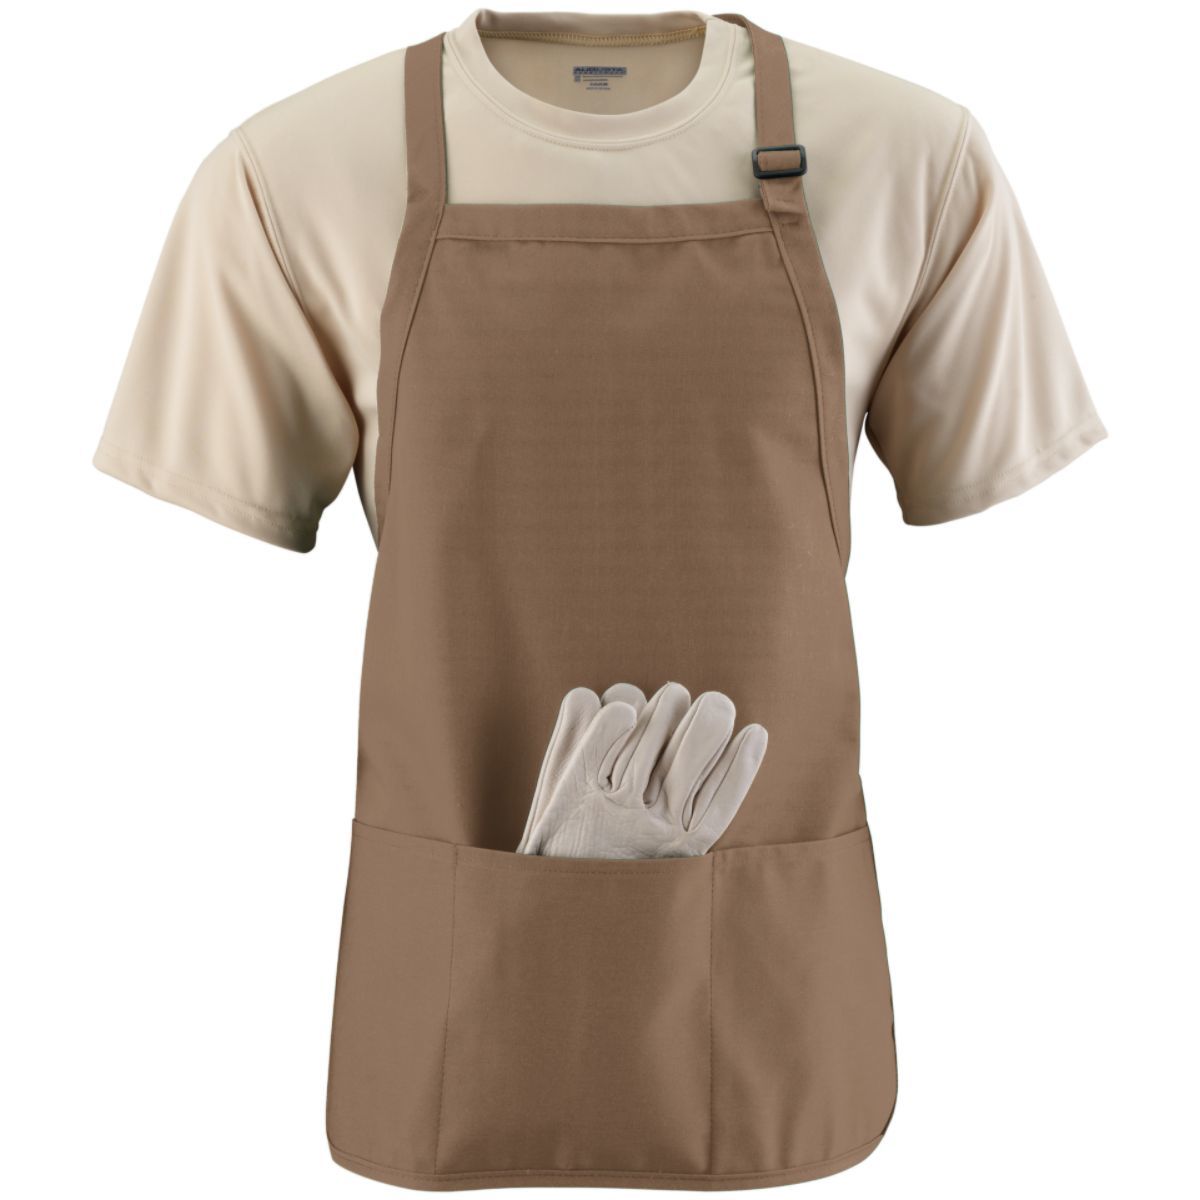 Medium Length Apron With Pouch 4250